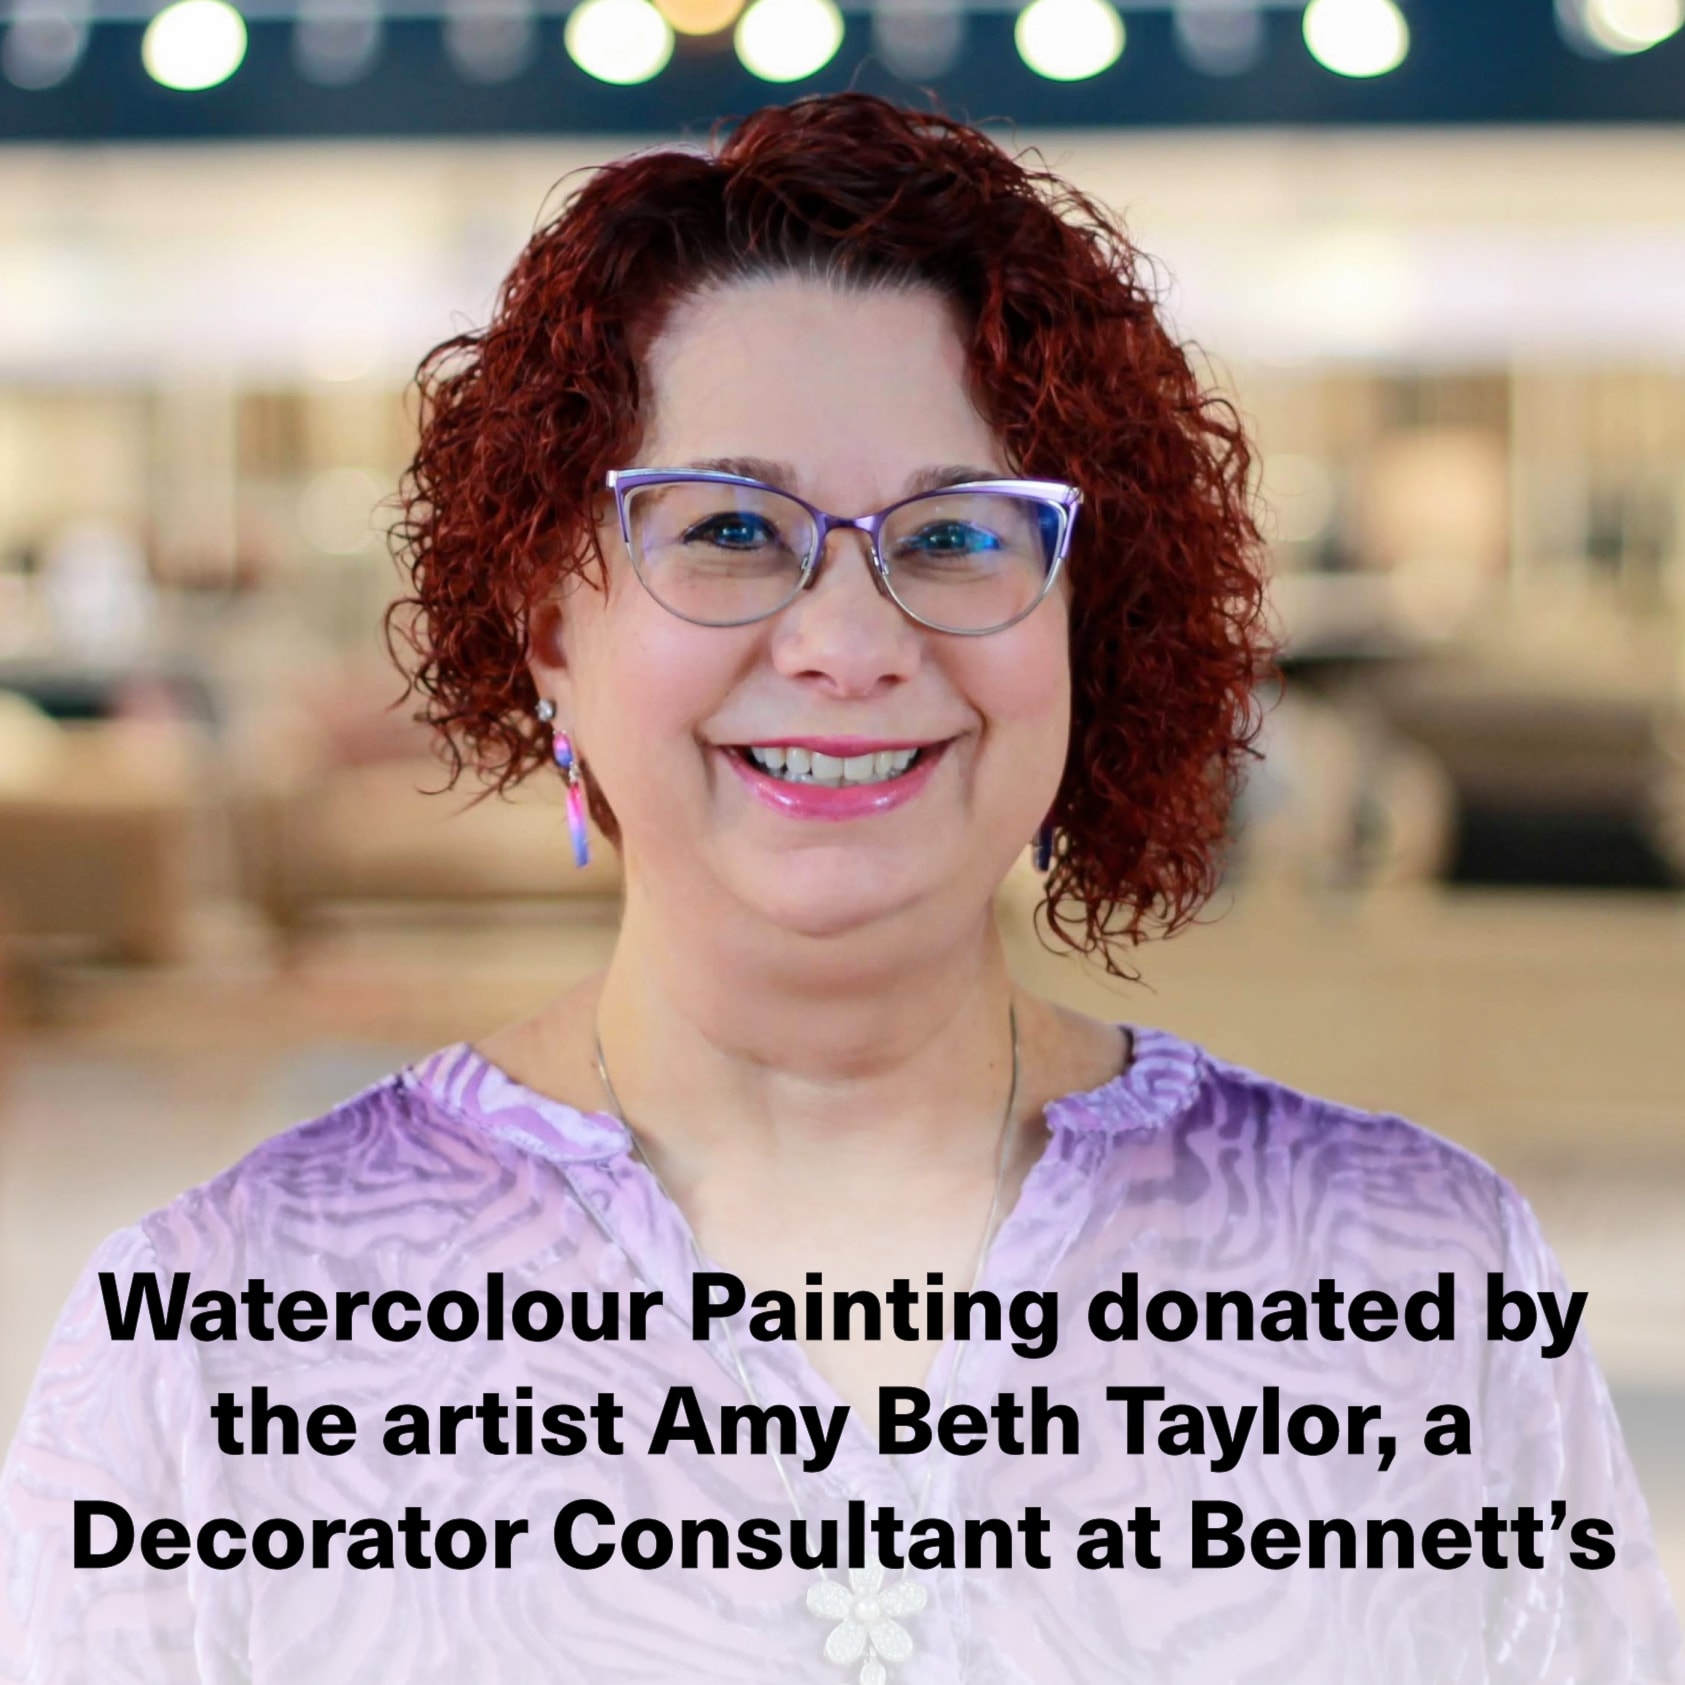 Watercolour painting donated by the artist Amy Beth Taylor, a Decorator Consultant at Bennett's